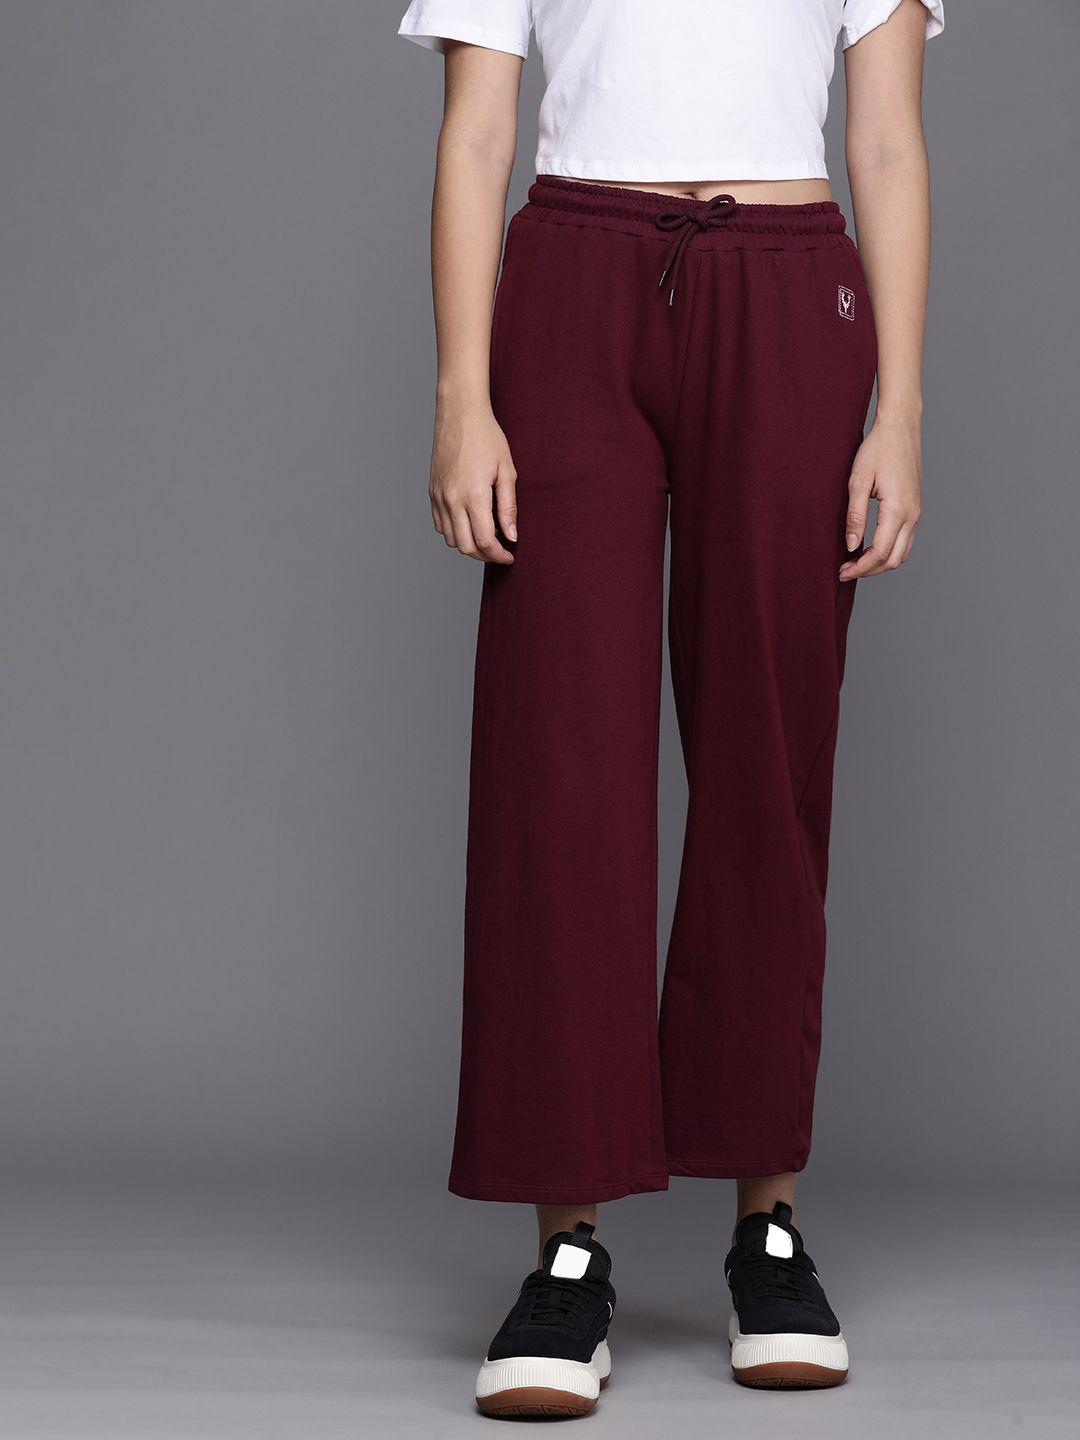 allen solly woman women maroon flared high-rise culottes trousers